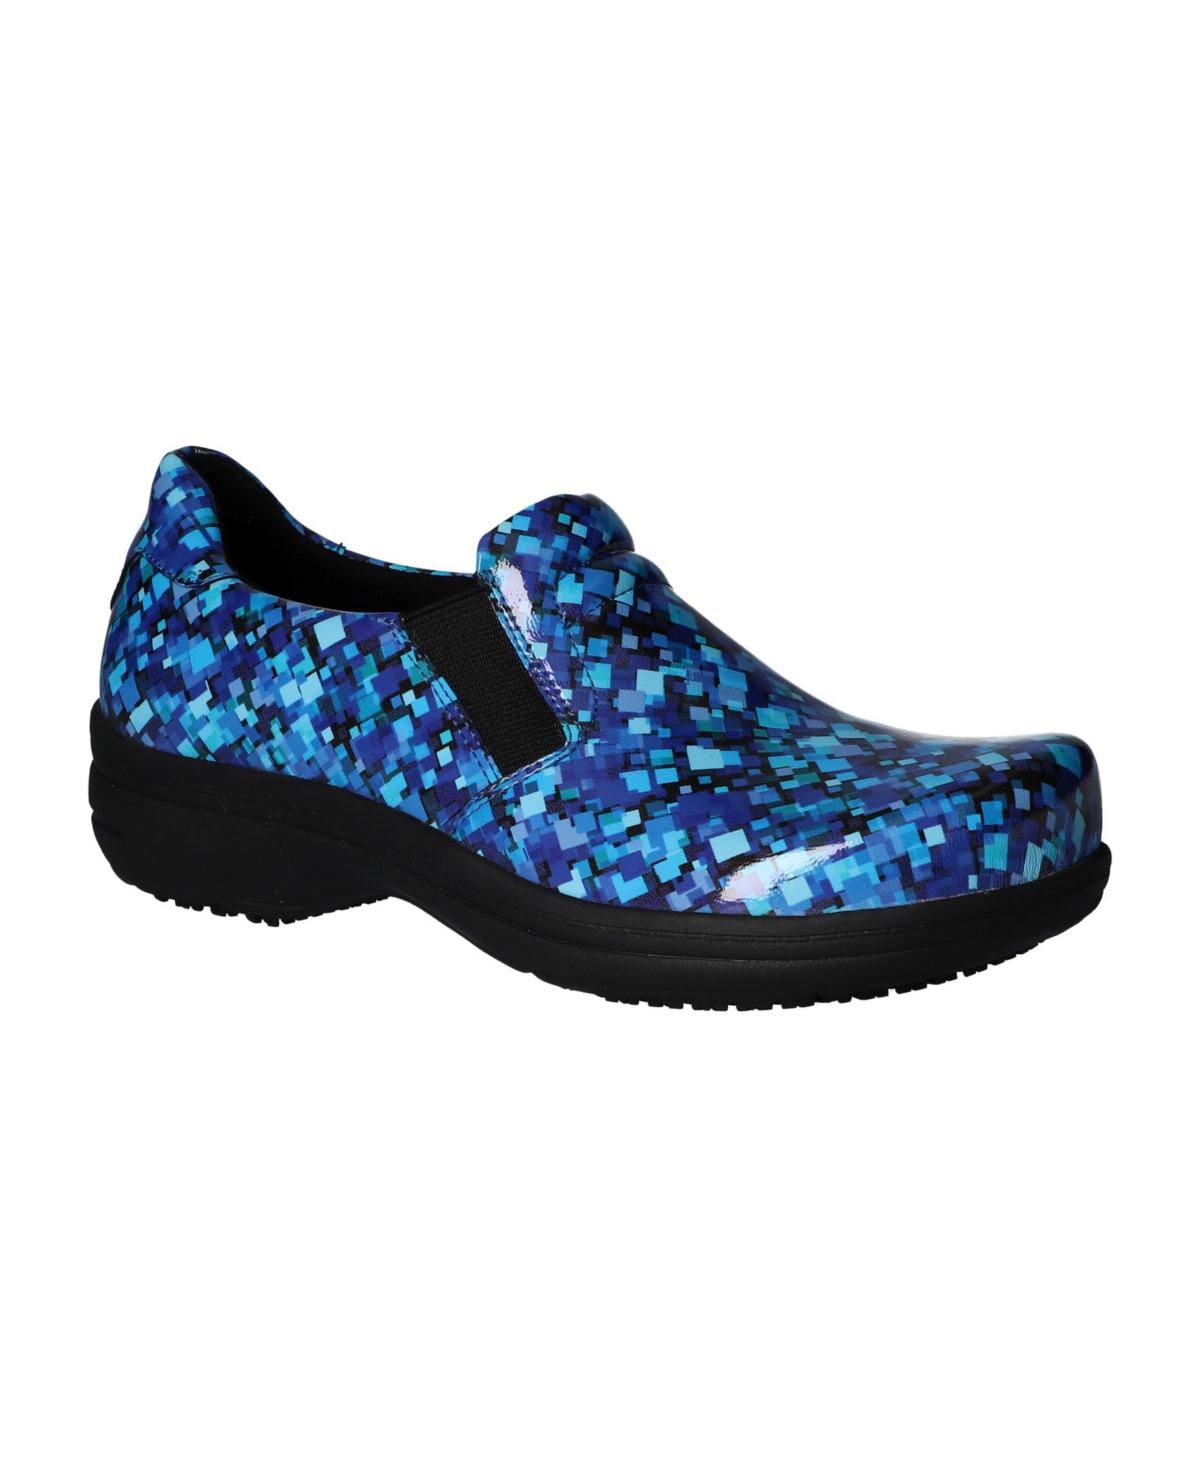 Easy Works Easy Street Women's Bind Clogs - Blue Spectral Print Patent Leather